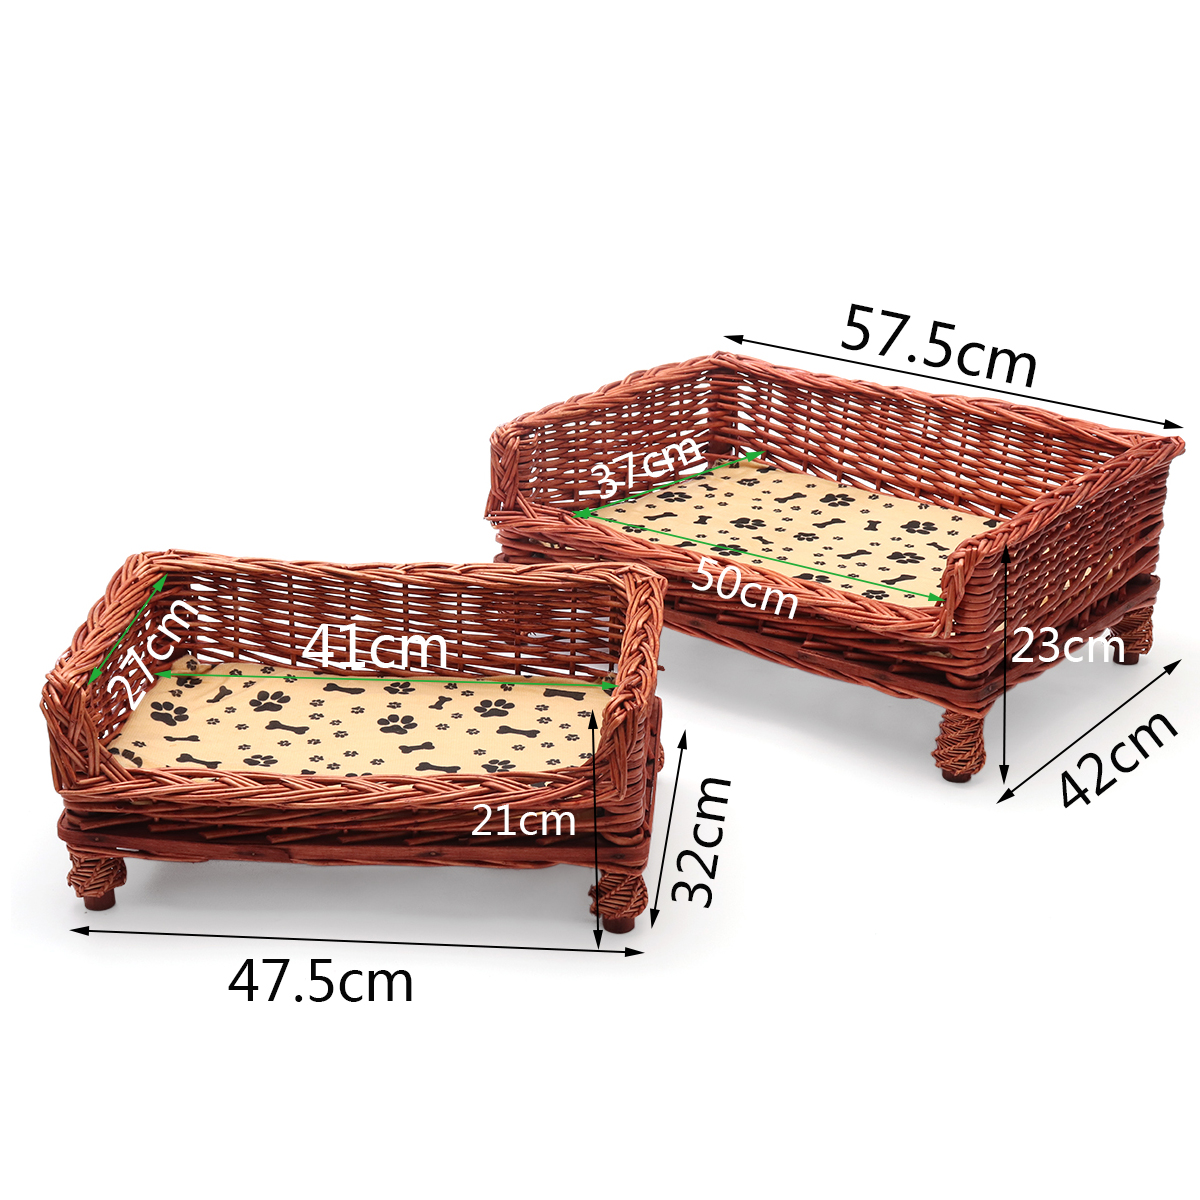 HAND-WOVEN-Wicker-Pet-Bed-Dog-Cat-Basket-Shabby-Chic-Sleeping-Durable-Washable-1640468-6